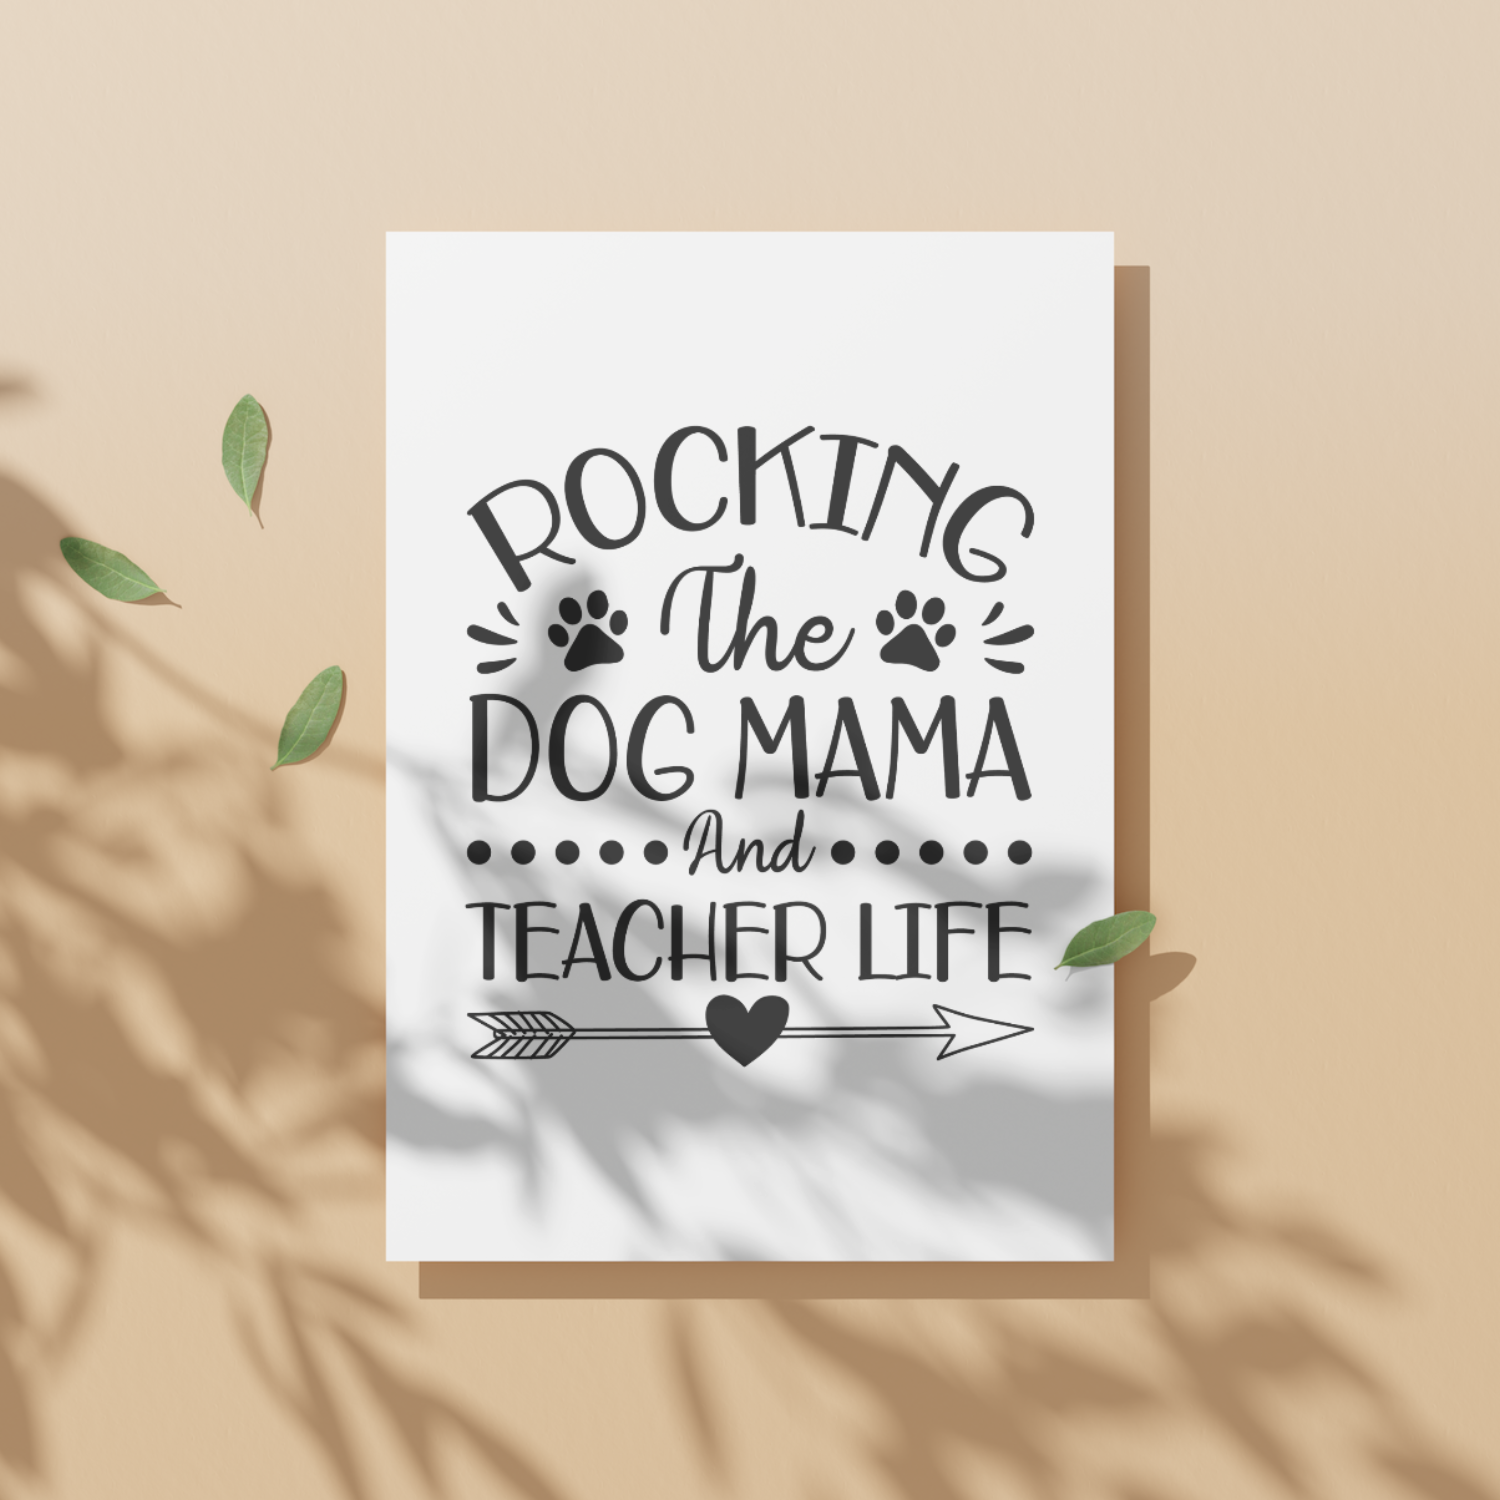 Rocking the dog mama and teacher life SVG | Digital Download | Cut File | SVG - Only The Sweet Stuff